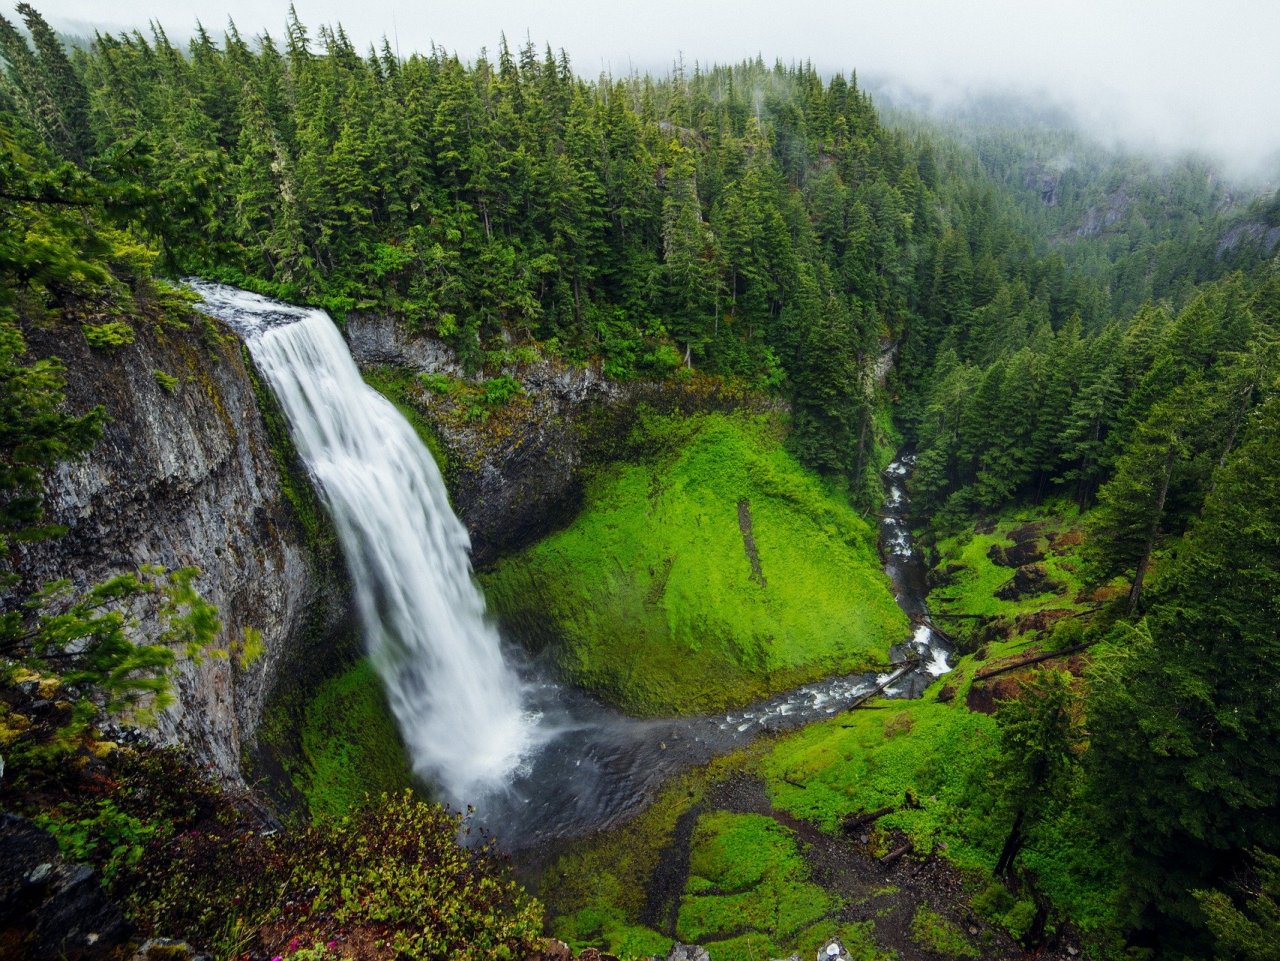 The Forest waterfall jigsaw puzzle